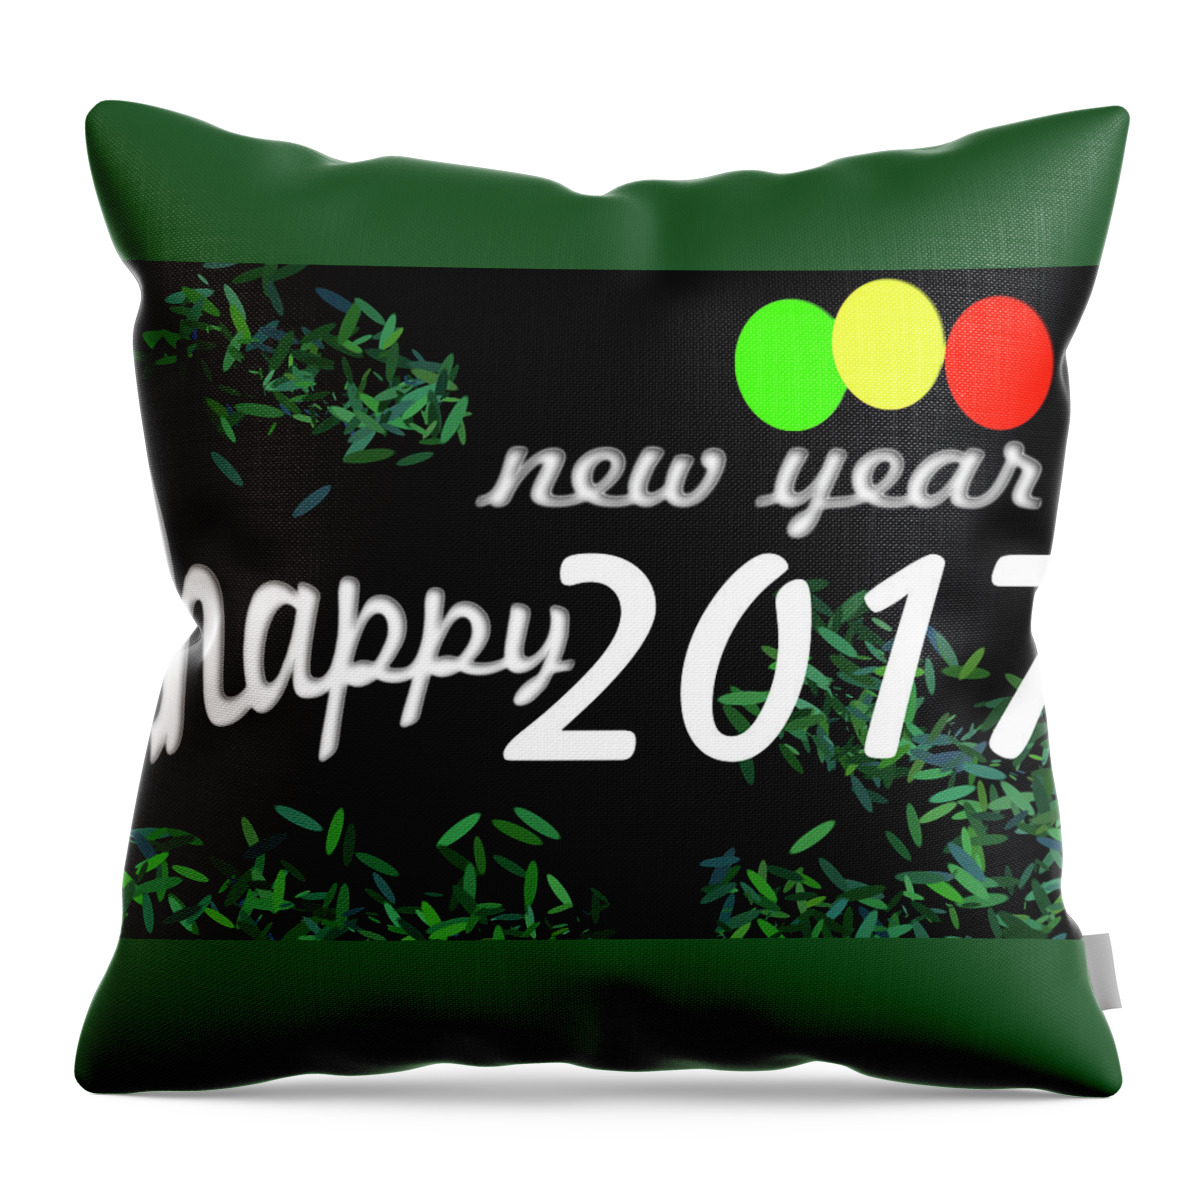 2017 Throw Pillow featuring the digital art About New Year by Dani Awaludin